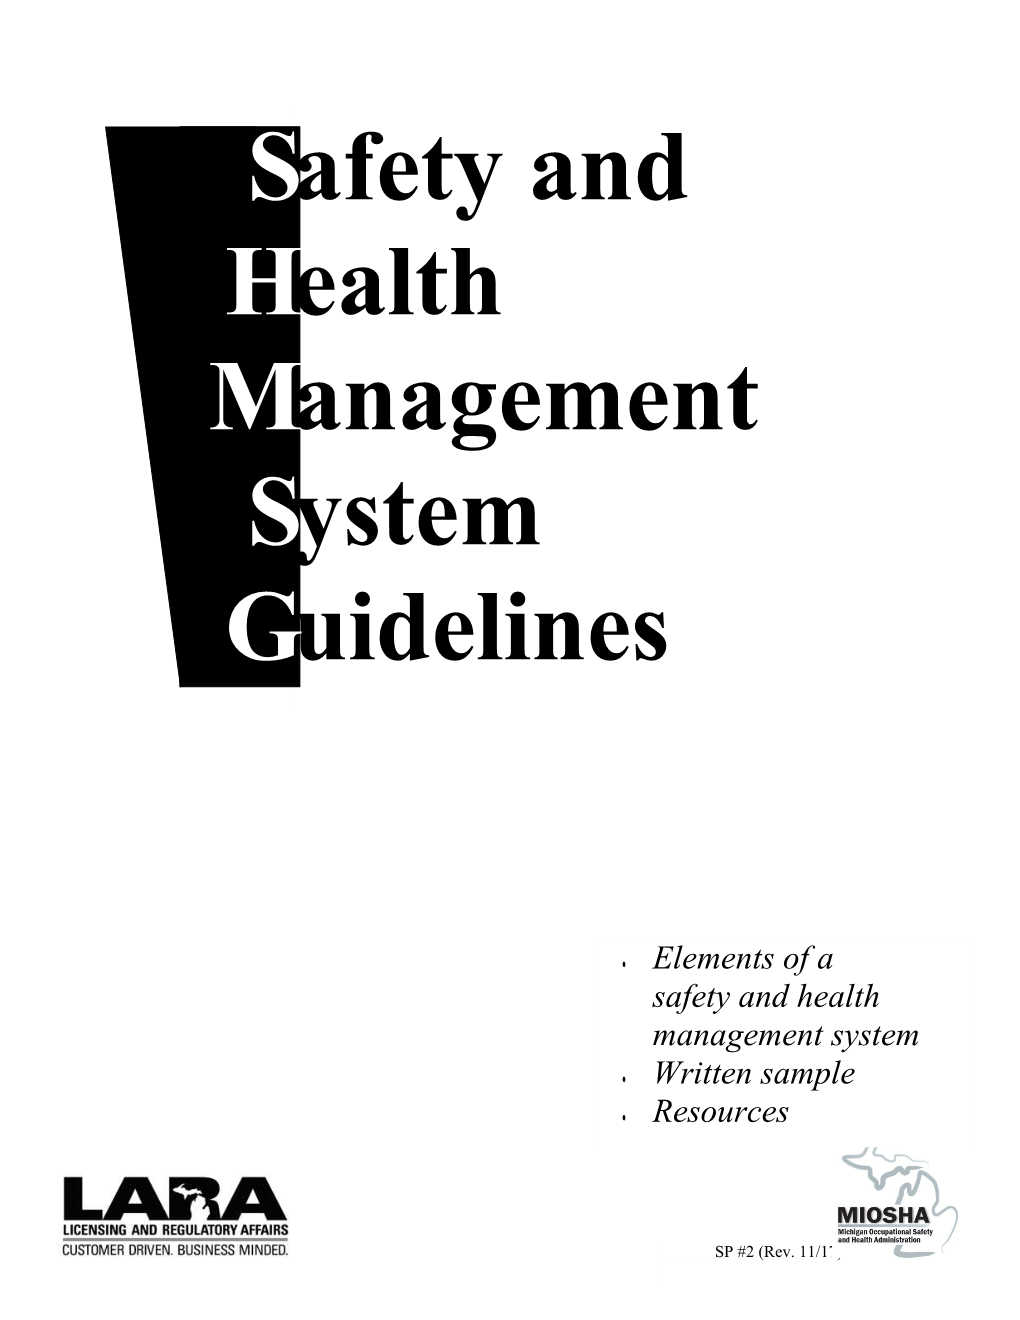 Safety & Health Management System Guidelines